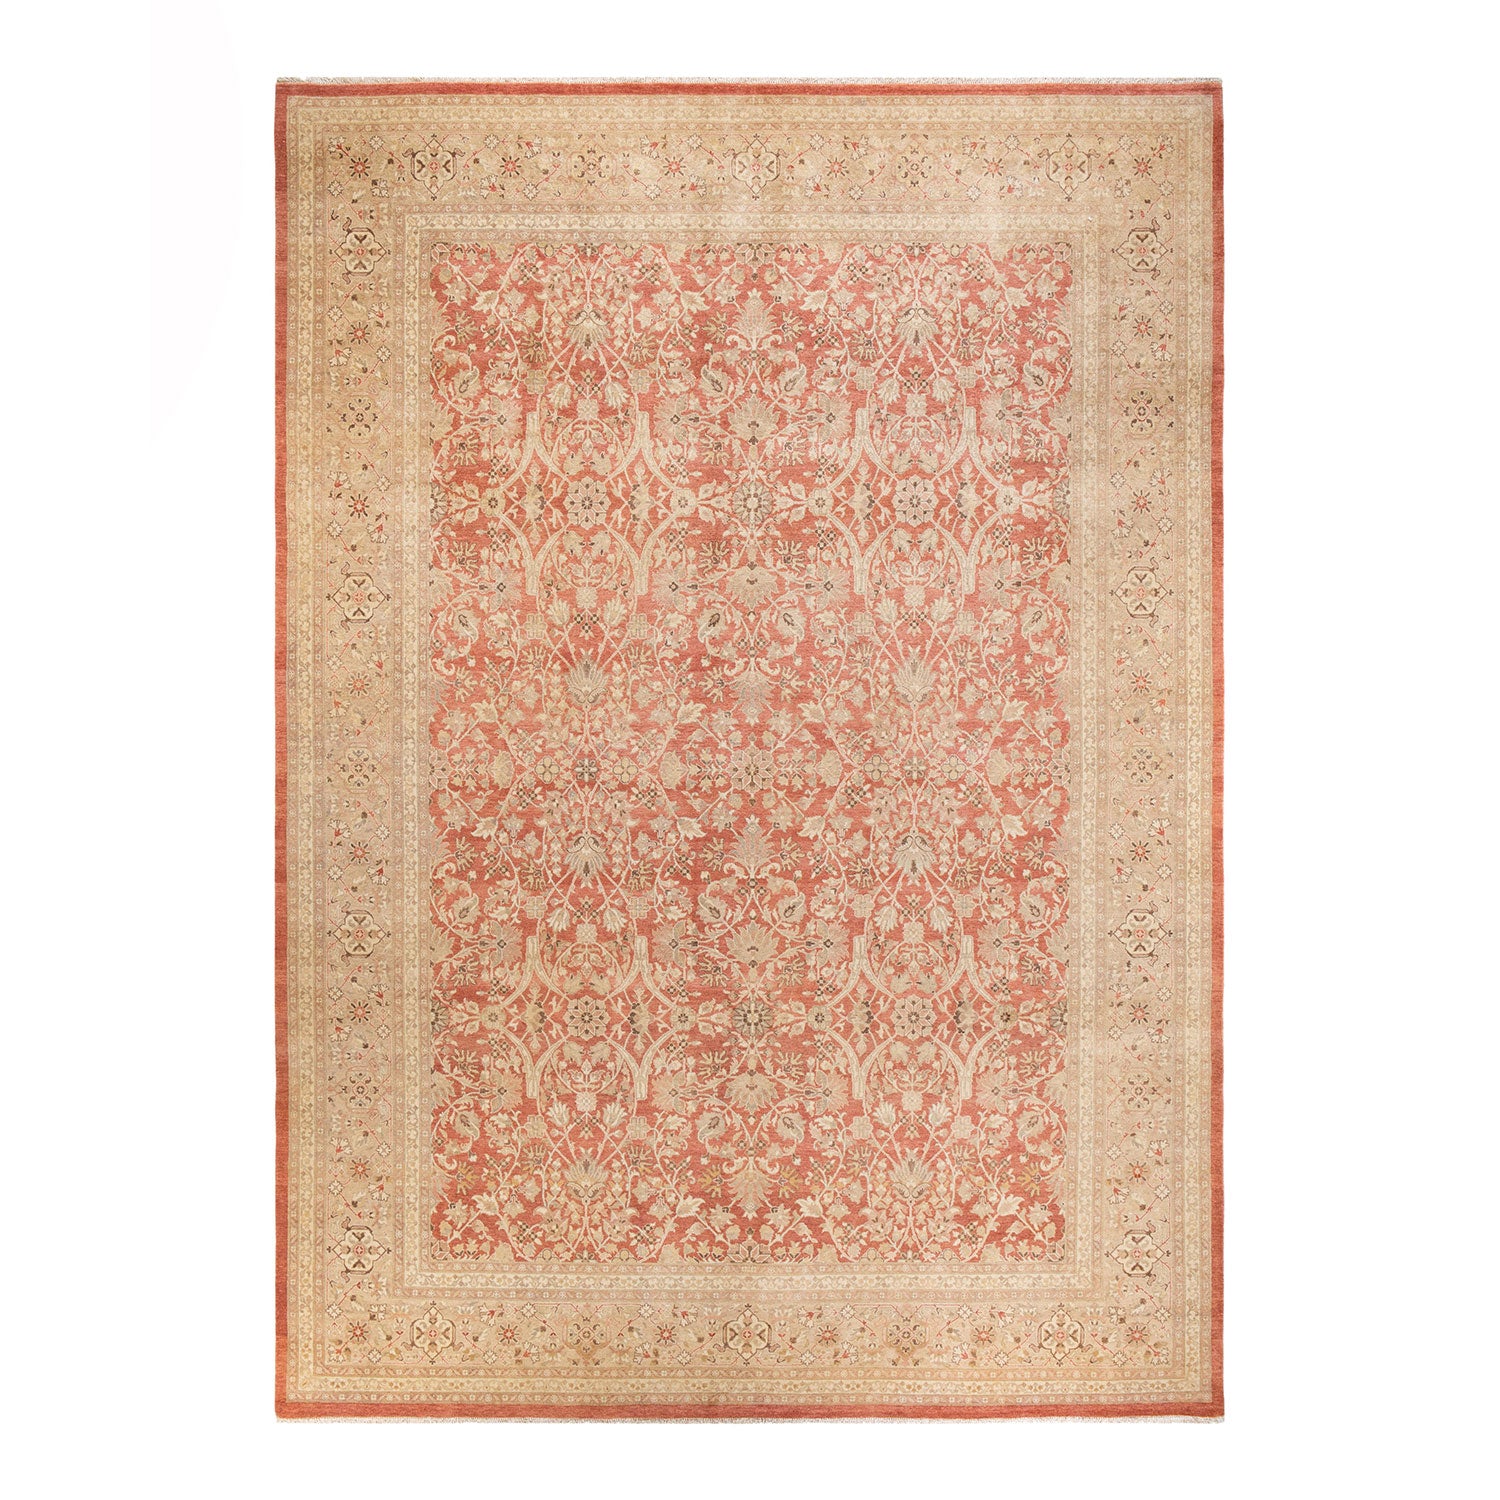 Detailed and ornate vintage rug with intricate floral patterns.